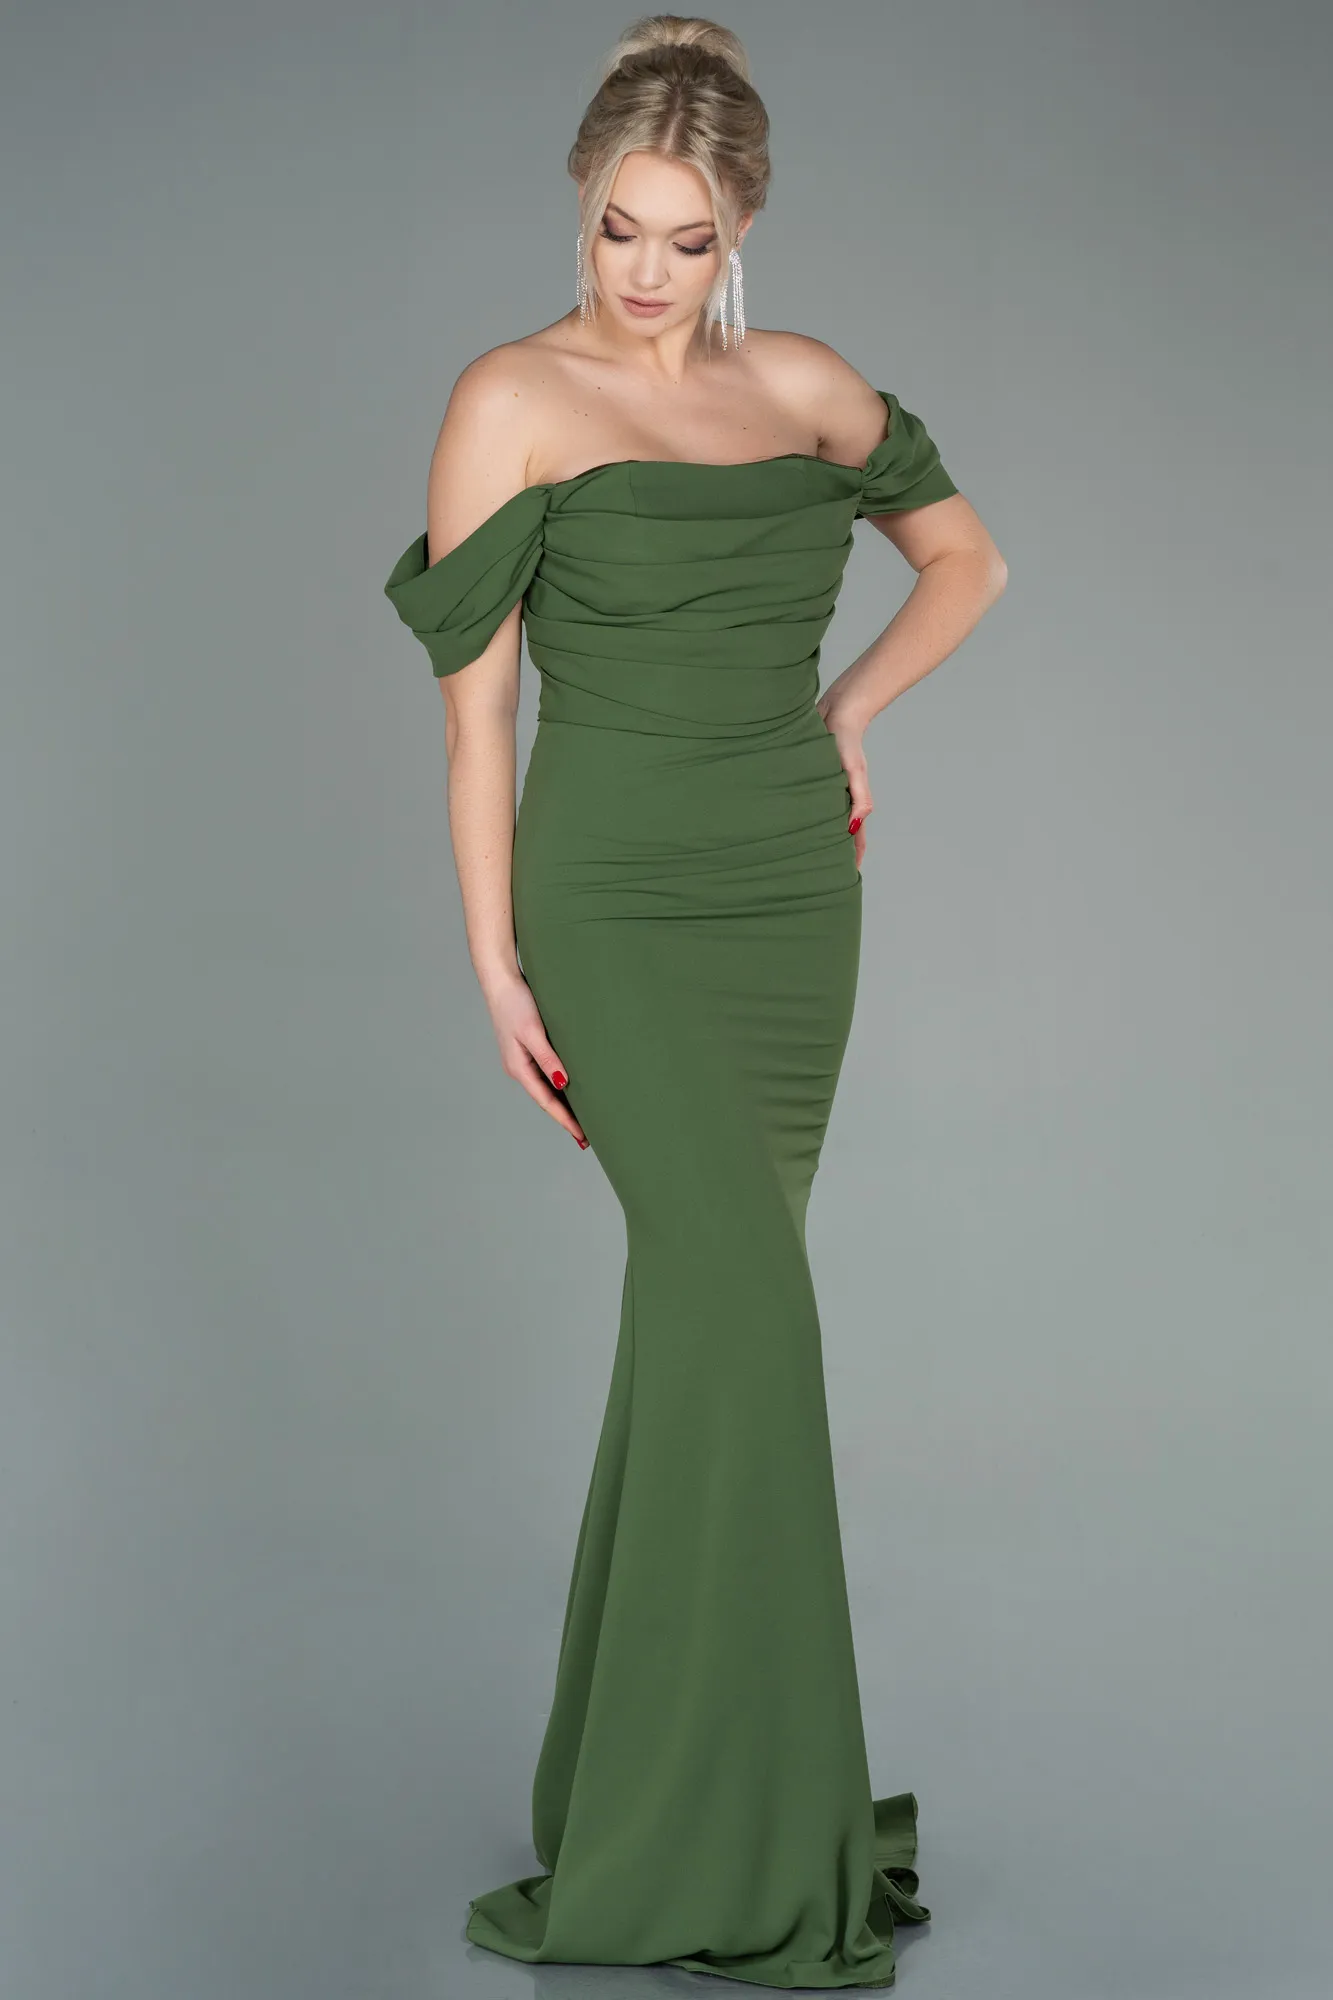 Olive Drab-Long Prom Gown ABU2783